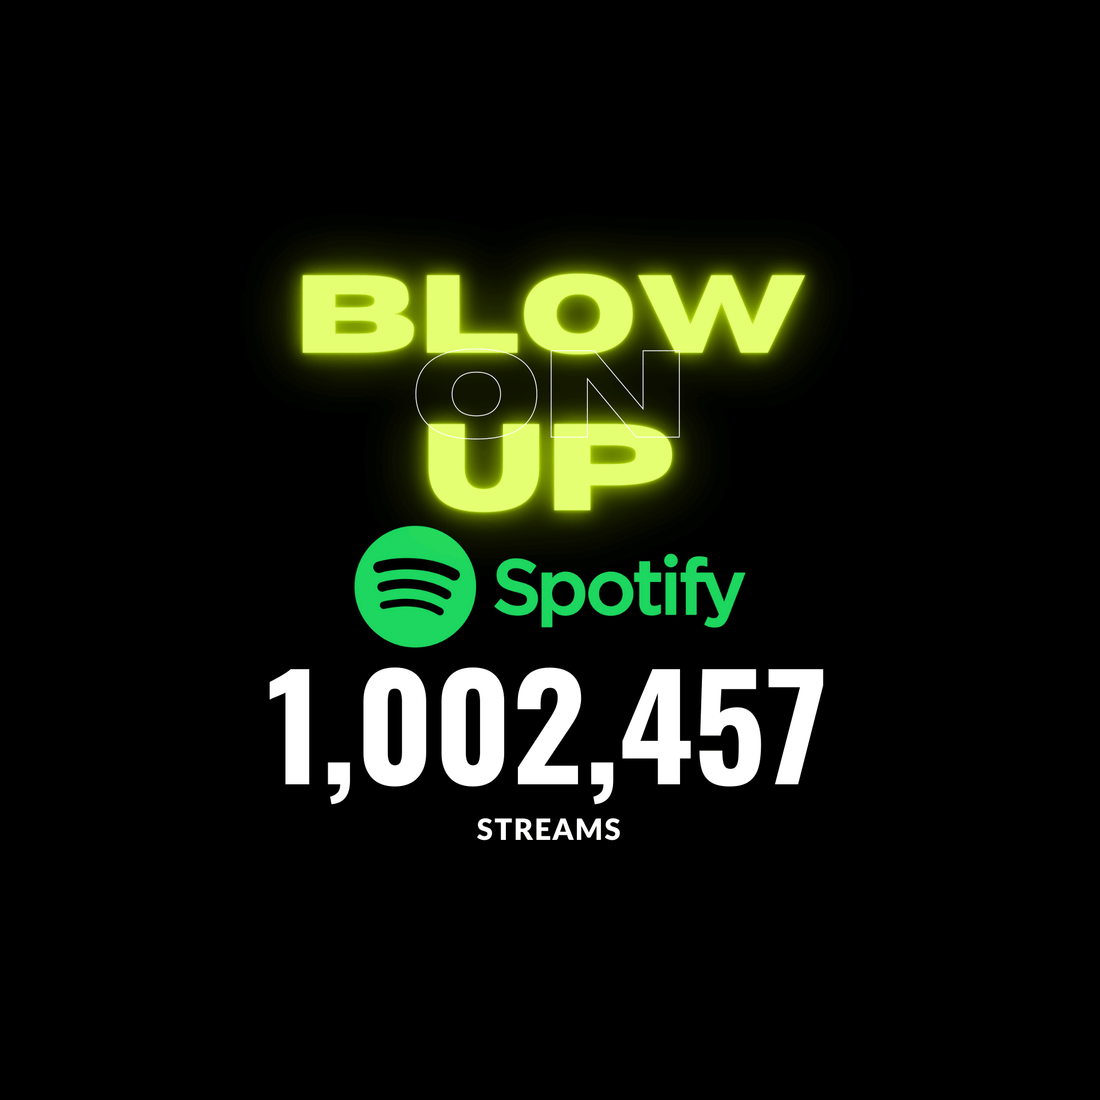 5 Steps to Blow Up on Spotify